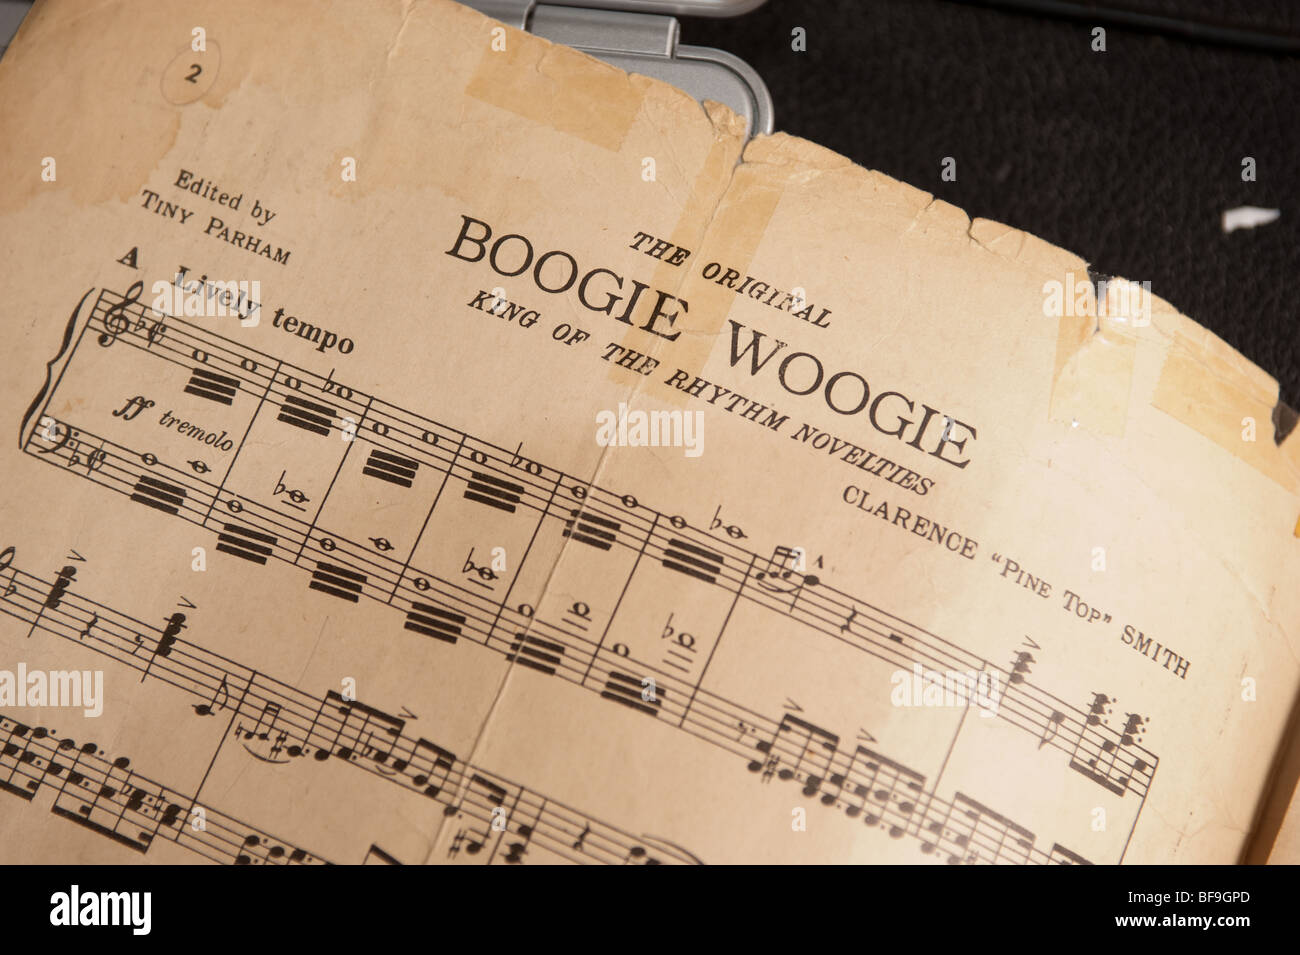 Boogie Woogie piano sheet music Banque D'Images